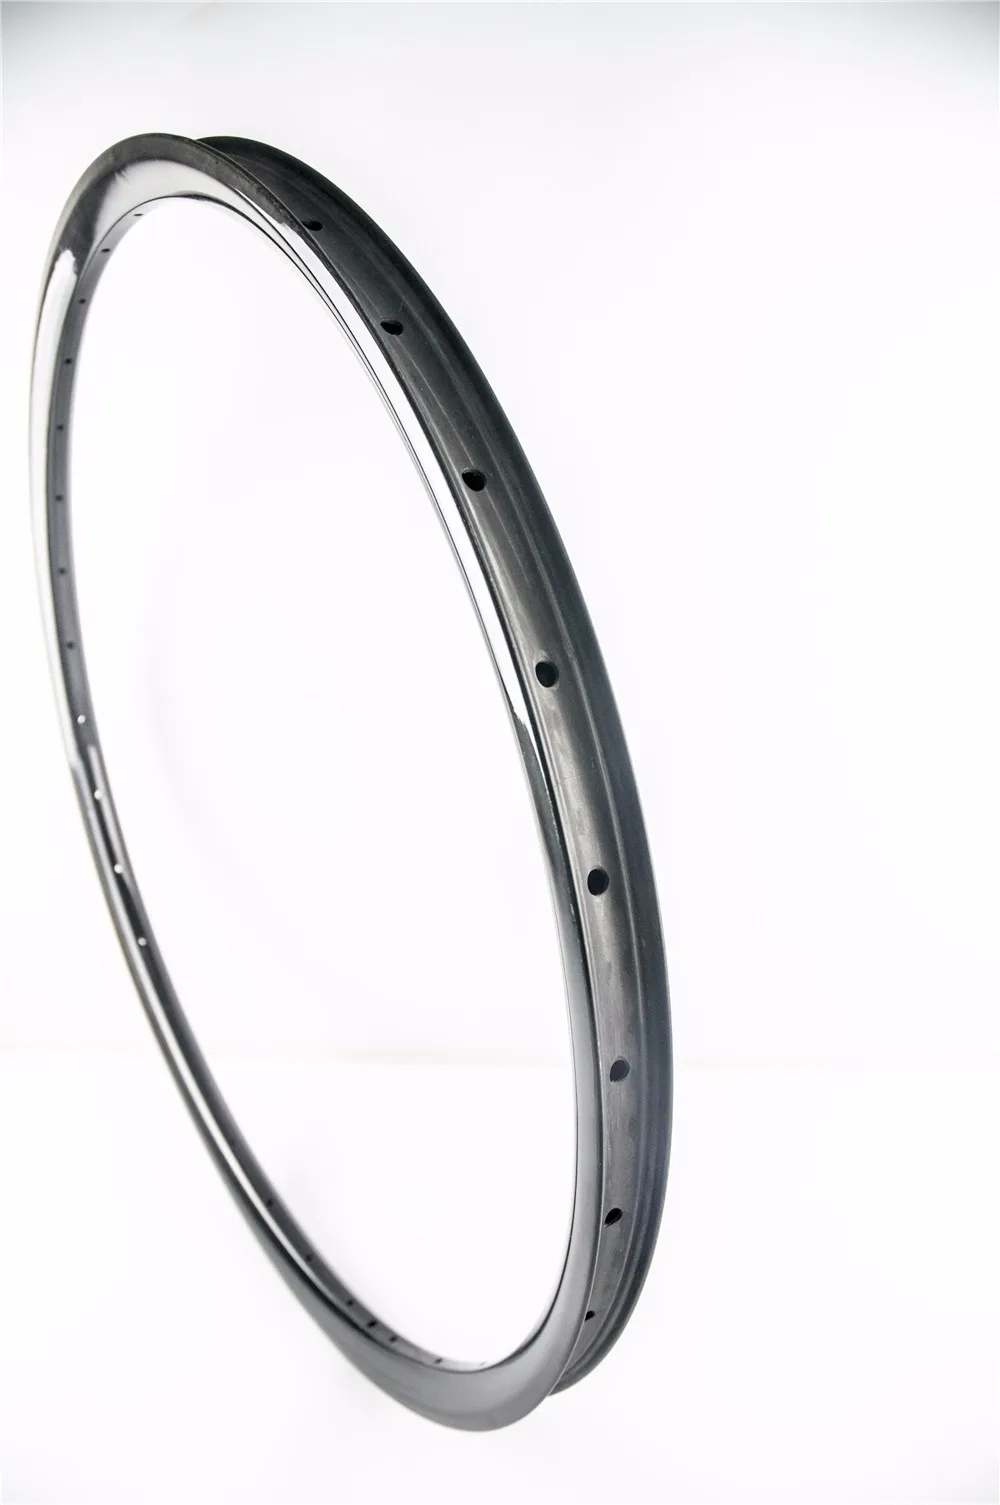 Flash Deal New carbon mtb rims 29er mountain bike rim 25mm depth with 30mm width clincher rim with free shipping 3